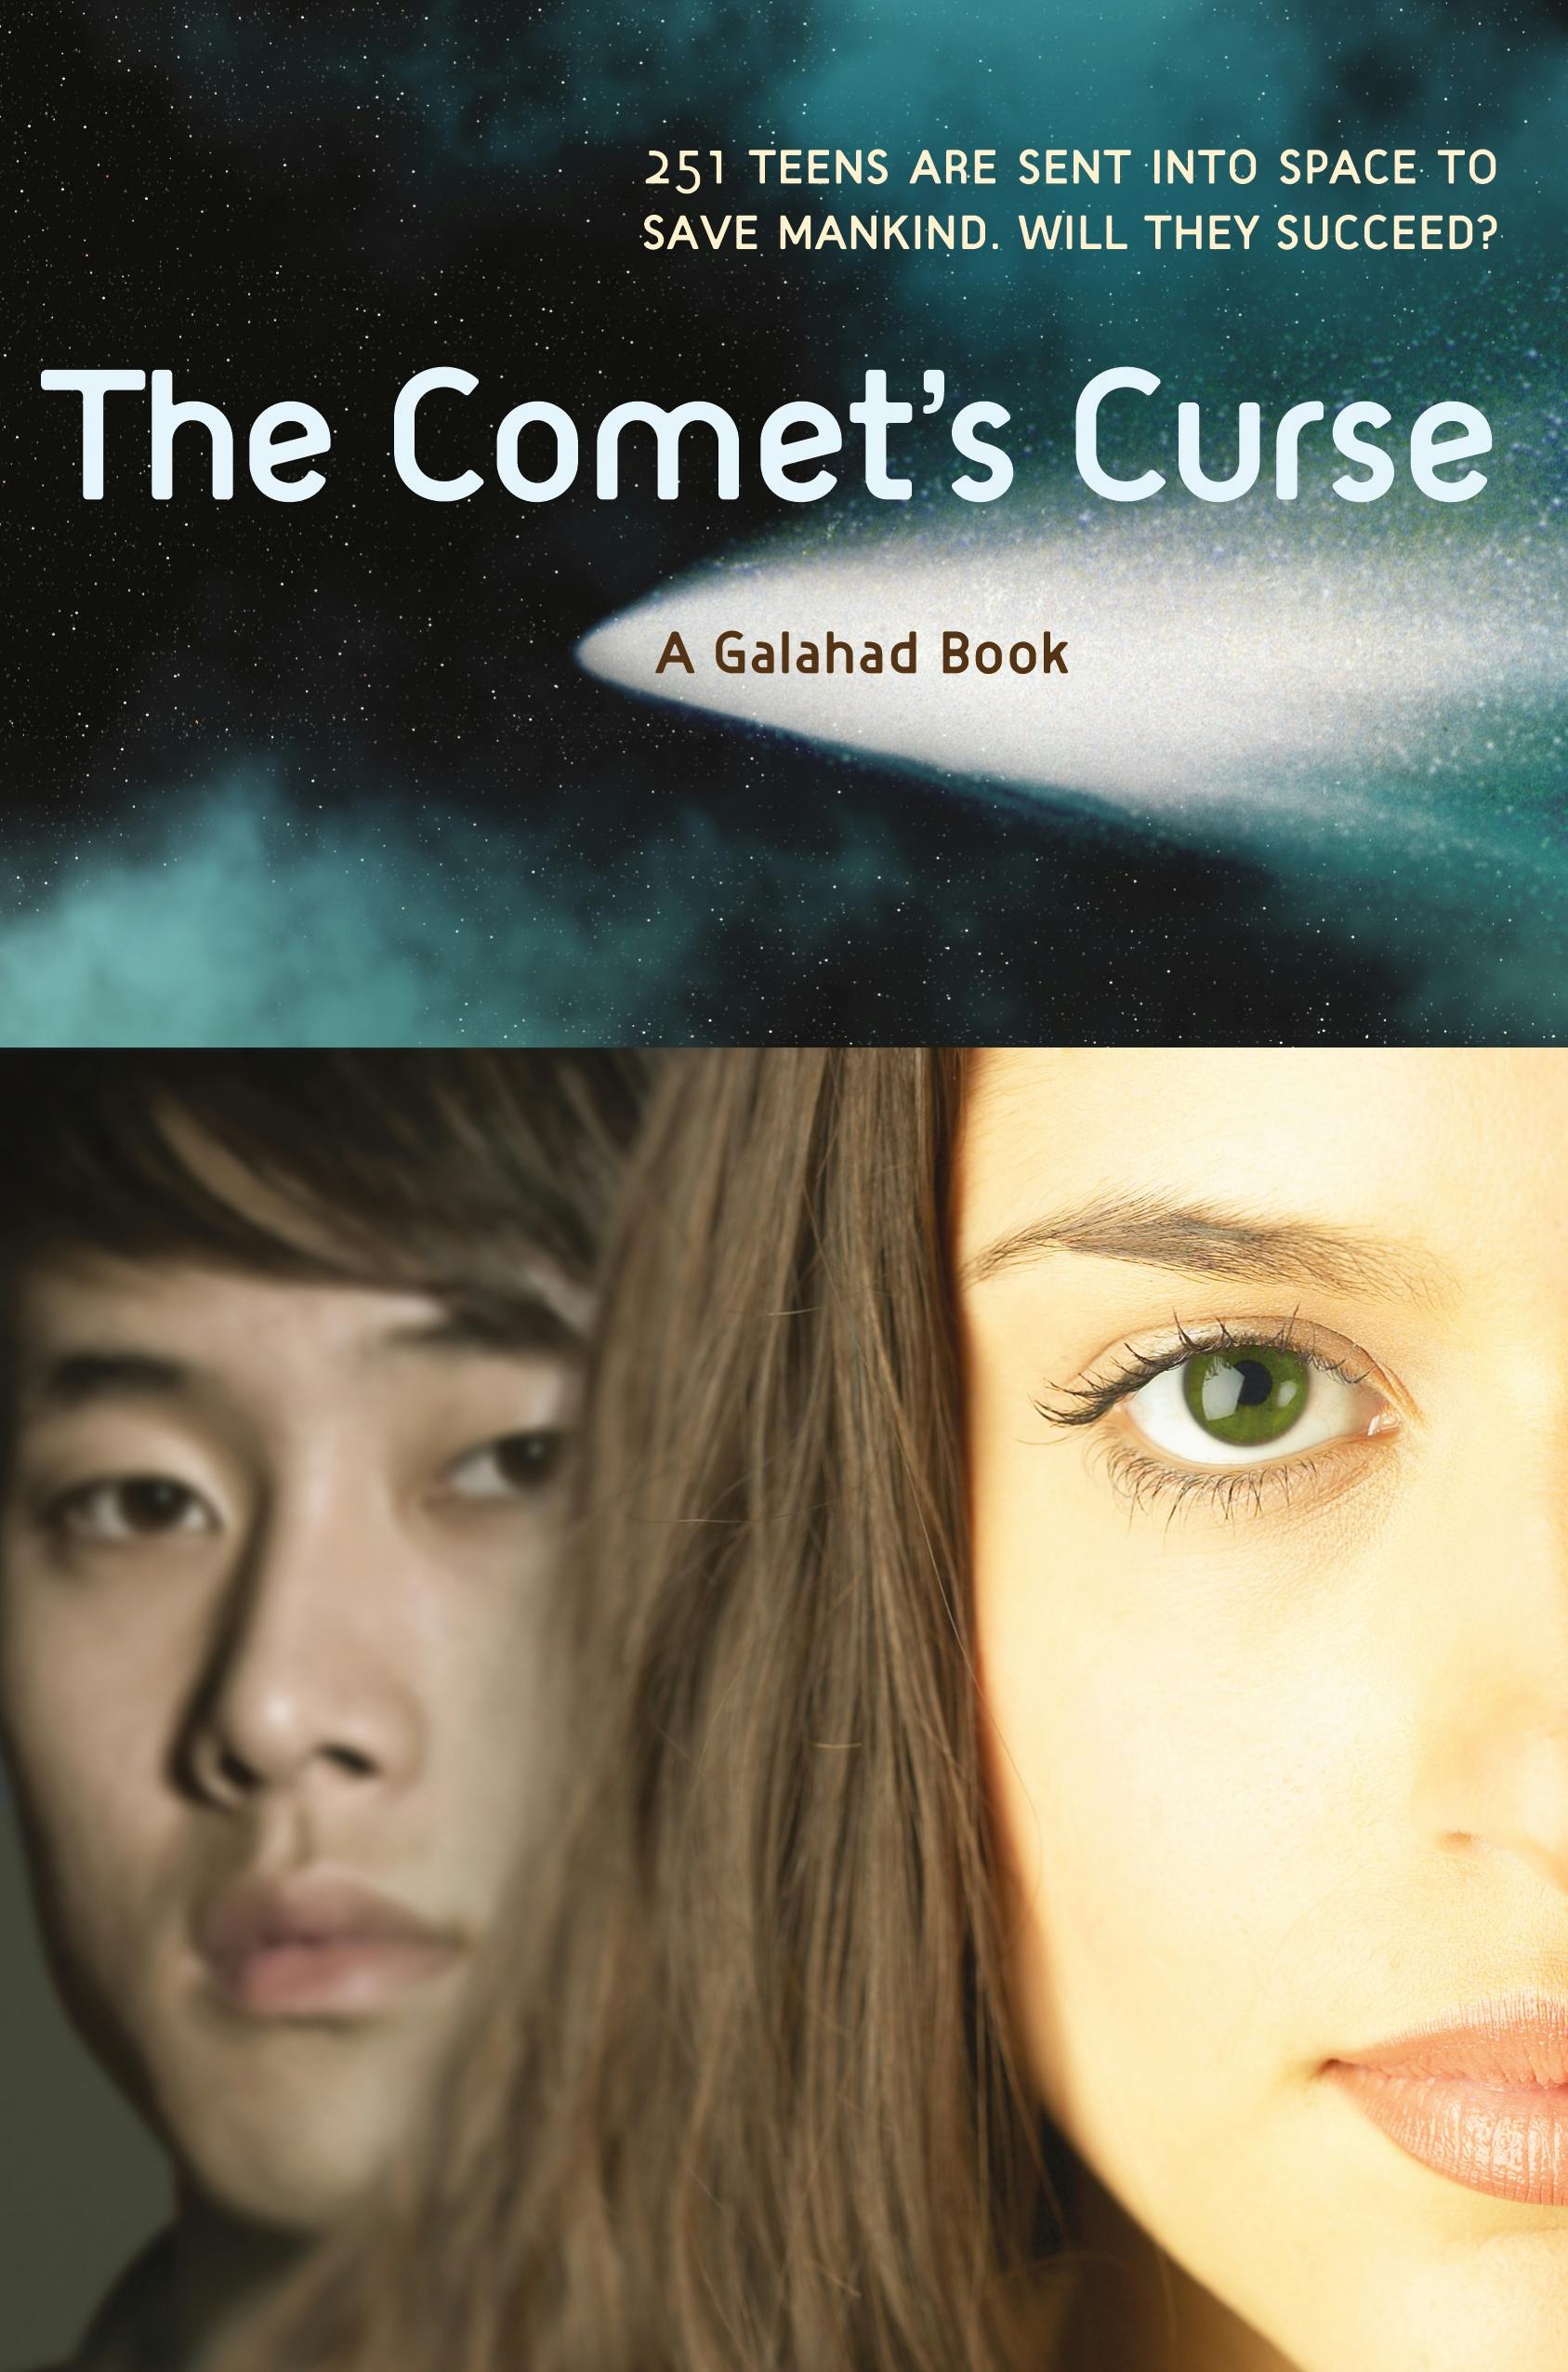 Cover for the book titled as: The Comet's Curse